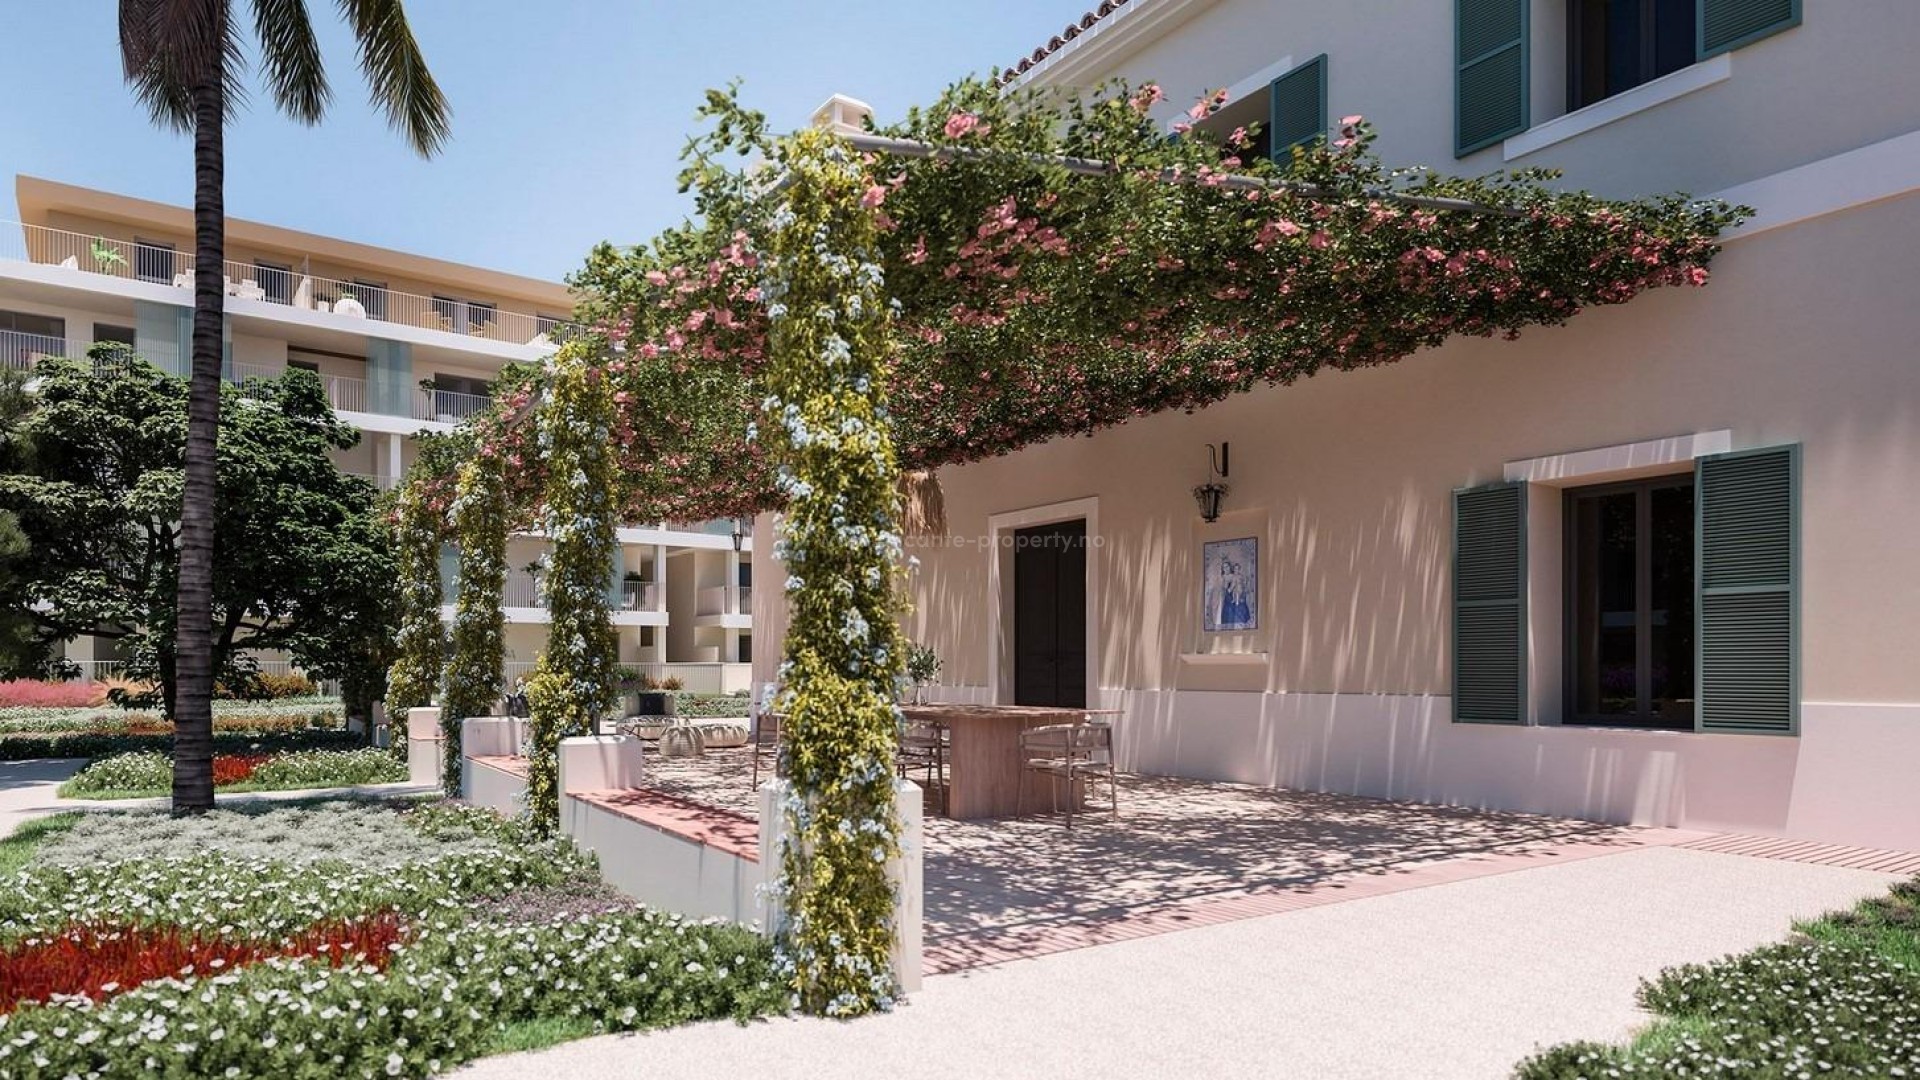 Exclusive residential complex in Denia with apartments and penthouses, 2/3/4 bedrooms, swimming pool for adults and children, gym, a step from the sea